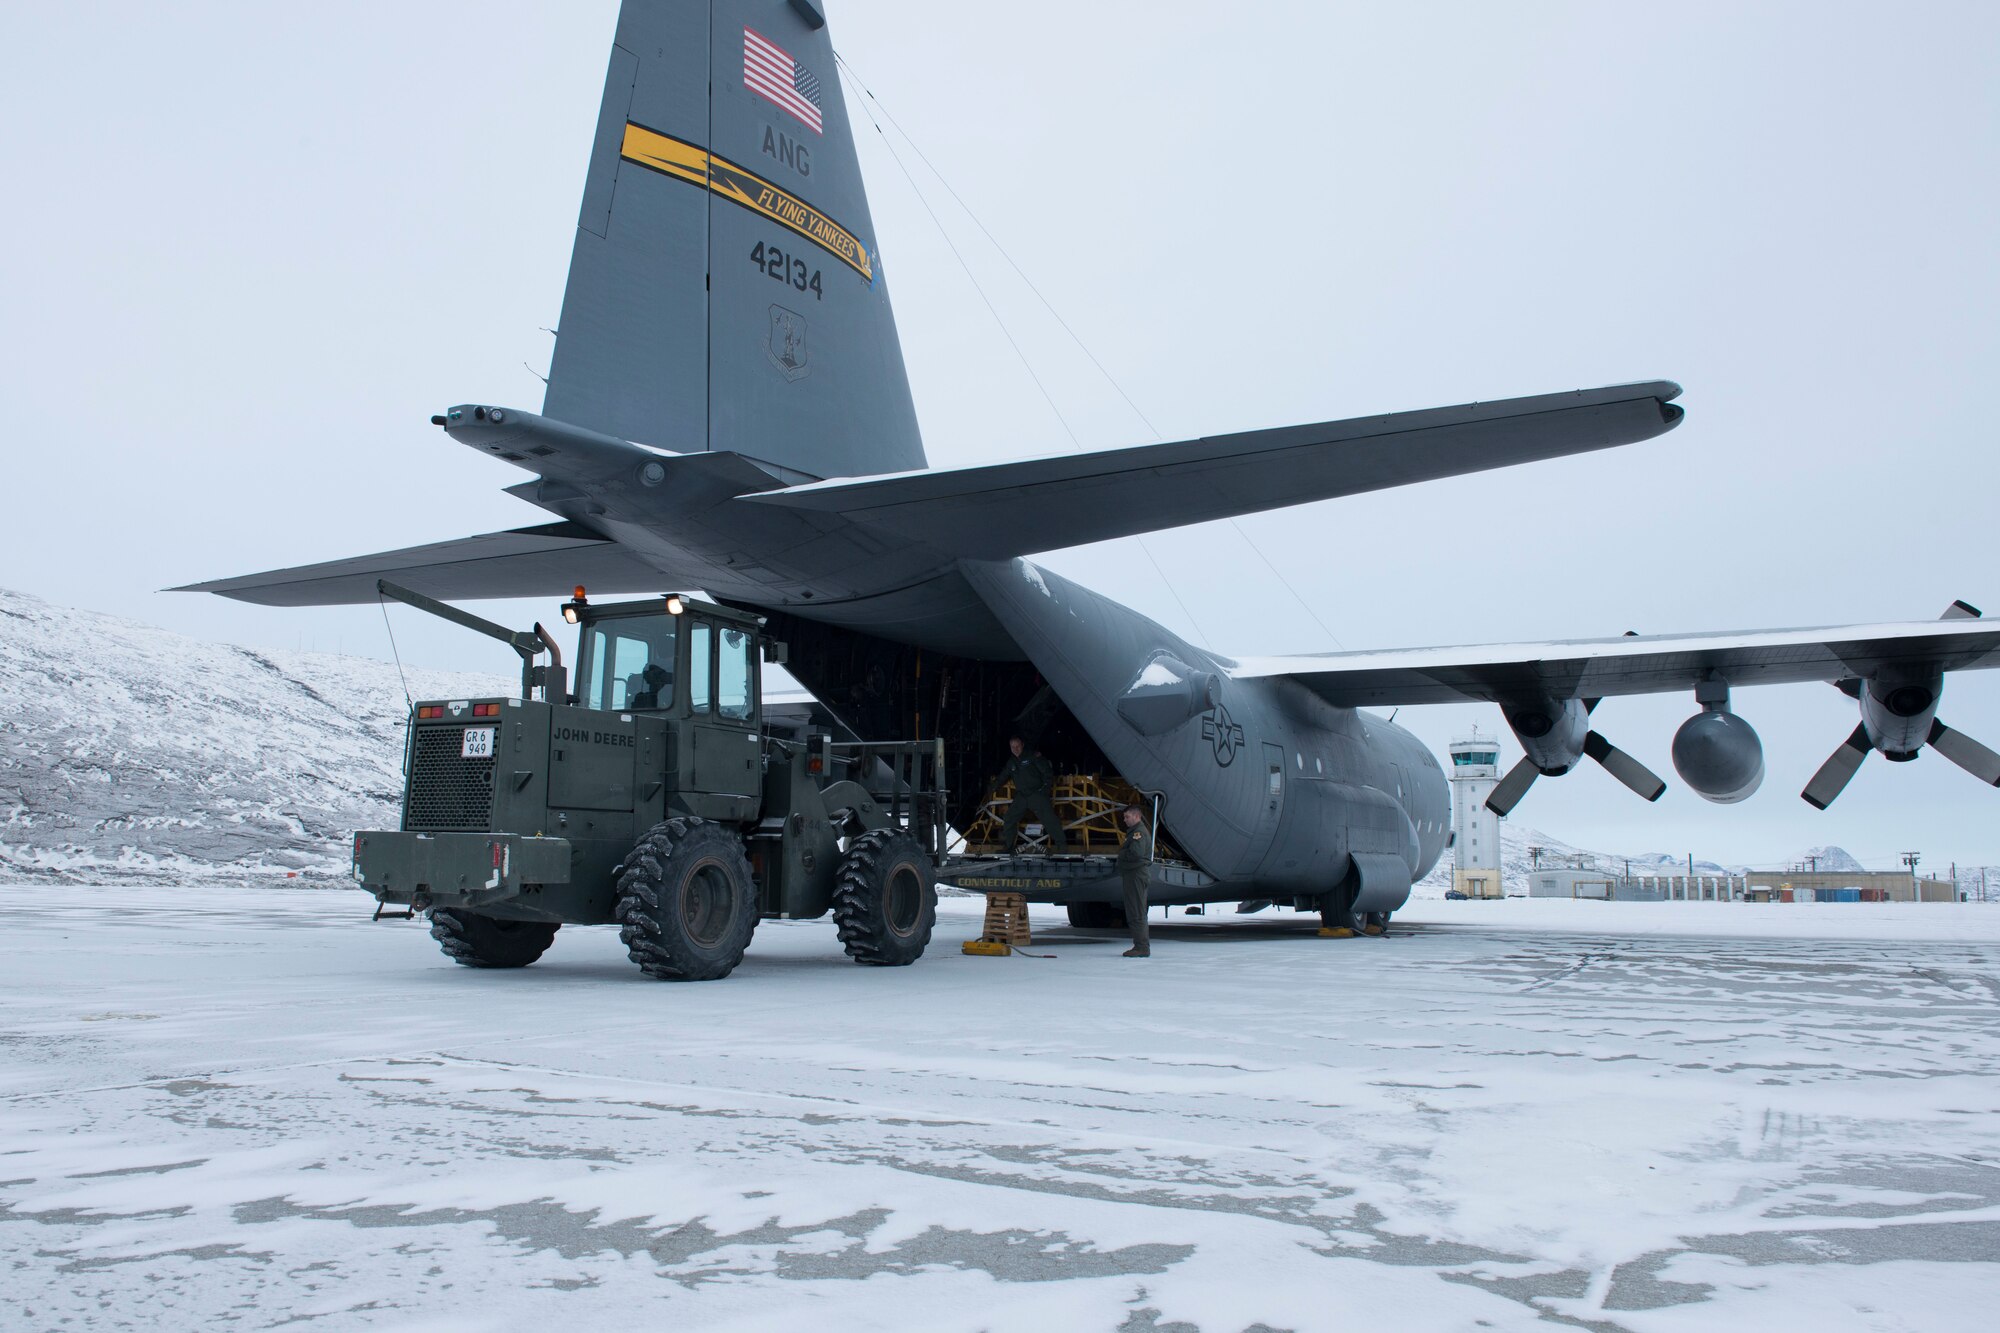 Members of the 103rd Airlift Wing, Connecticut Air National Guard load supplies onto a C-130 H aircraft, April 2, 2019 in Kangerlussuaq, Greenland. The 118th Airlift Squadron flew to Greenland in support of the National Science Foundation climate research mission. (U.S. Air National Guard photo by Tech. Sgt. Tamara R. Dabney)